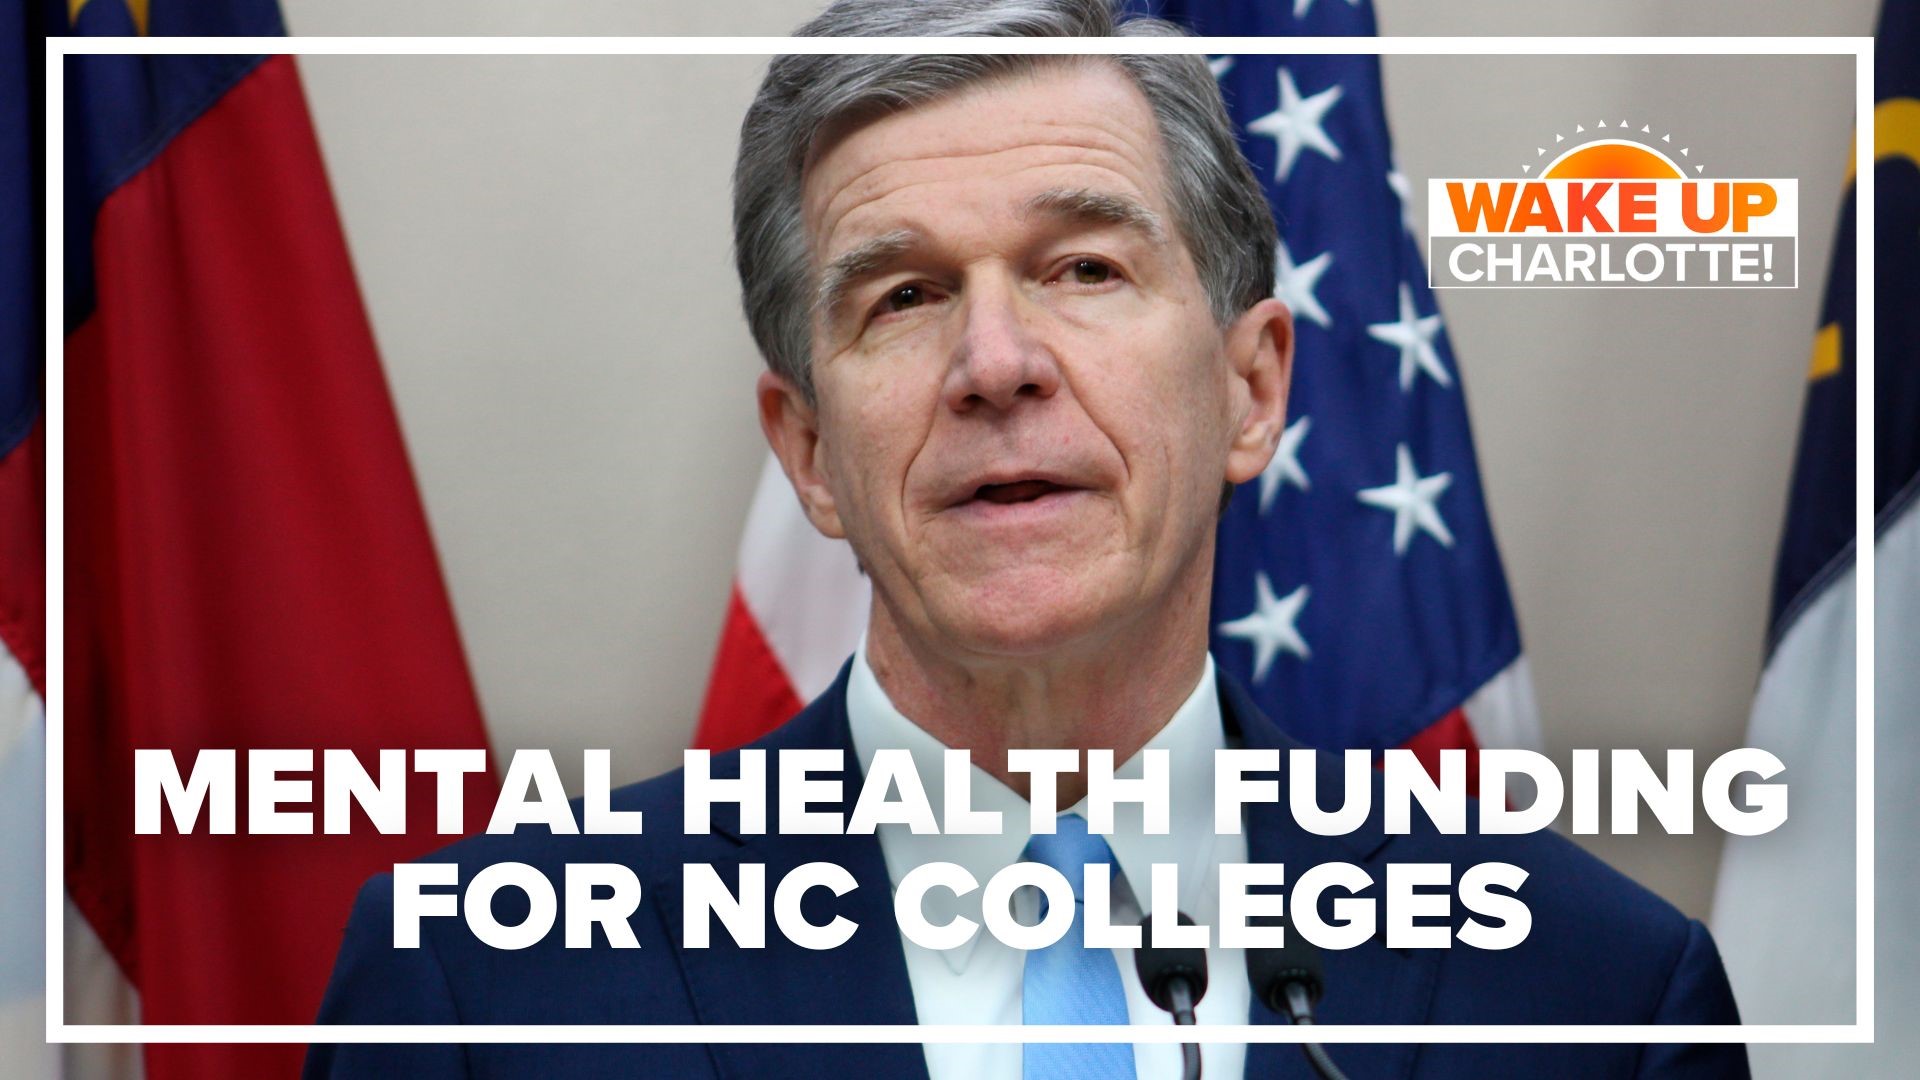 Millions of dollars will be going to North Carolina colleges for mental health services that will be available to students.